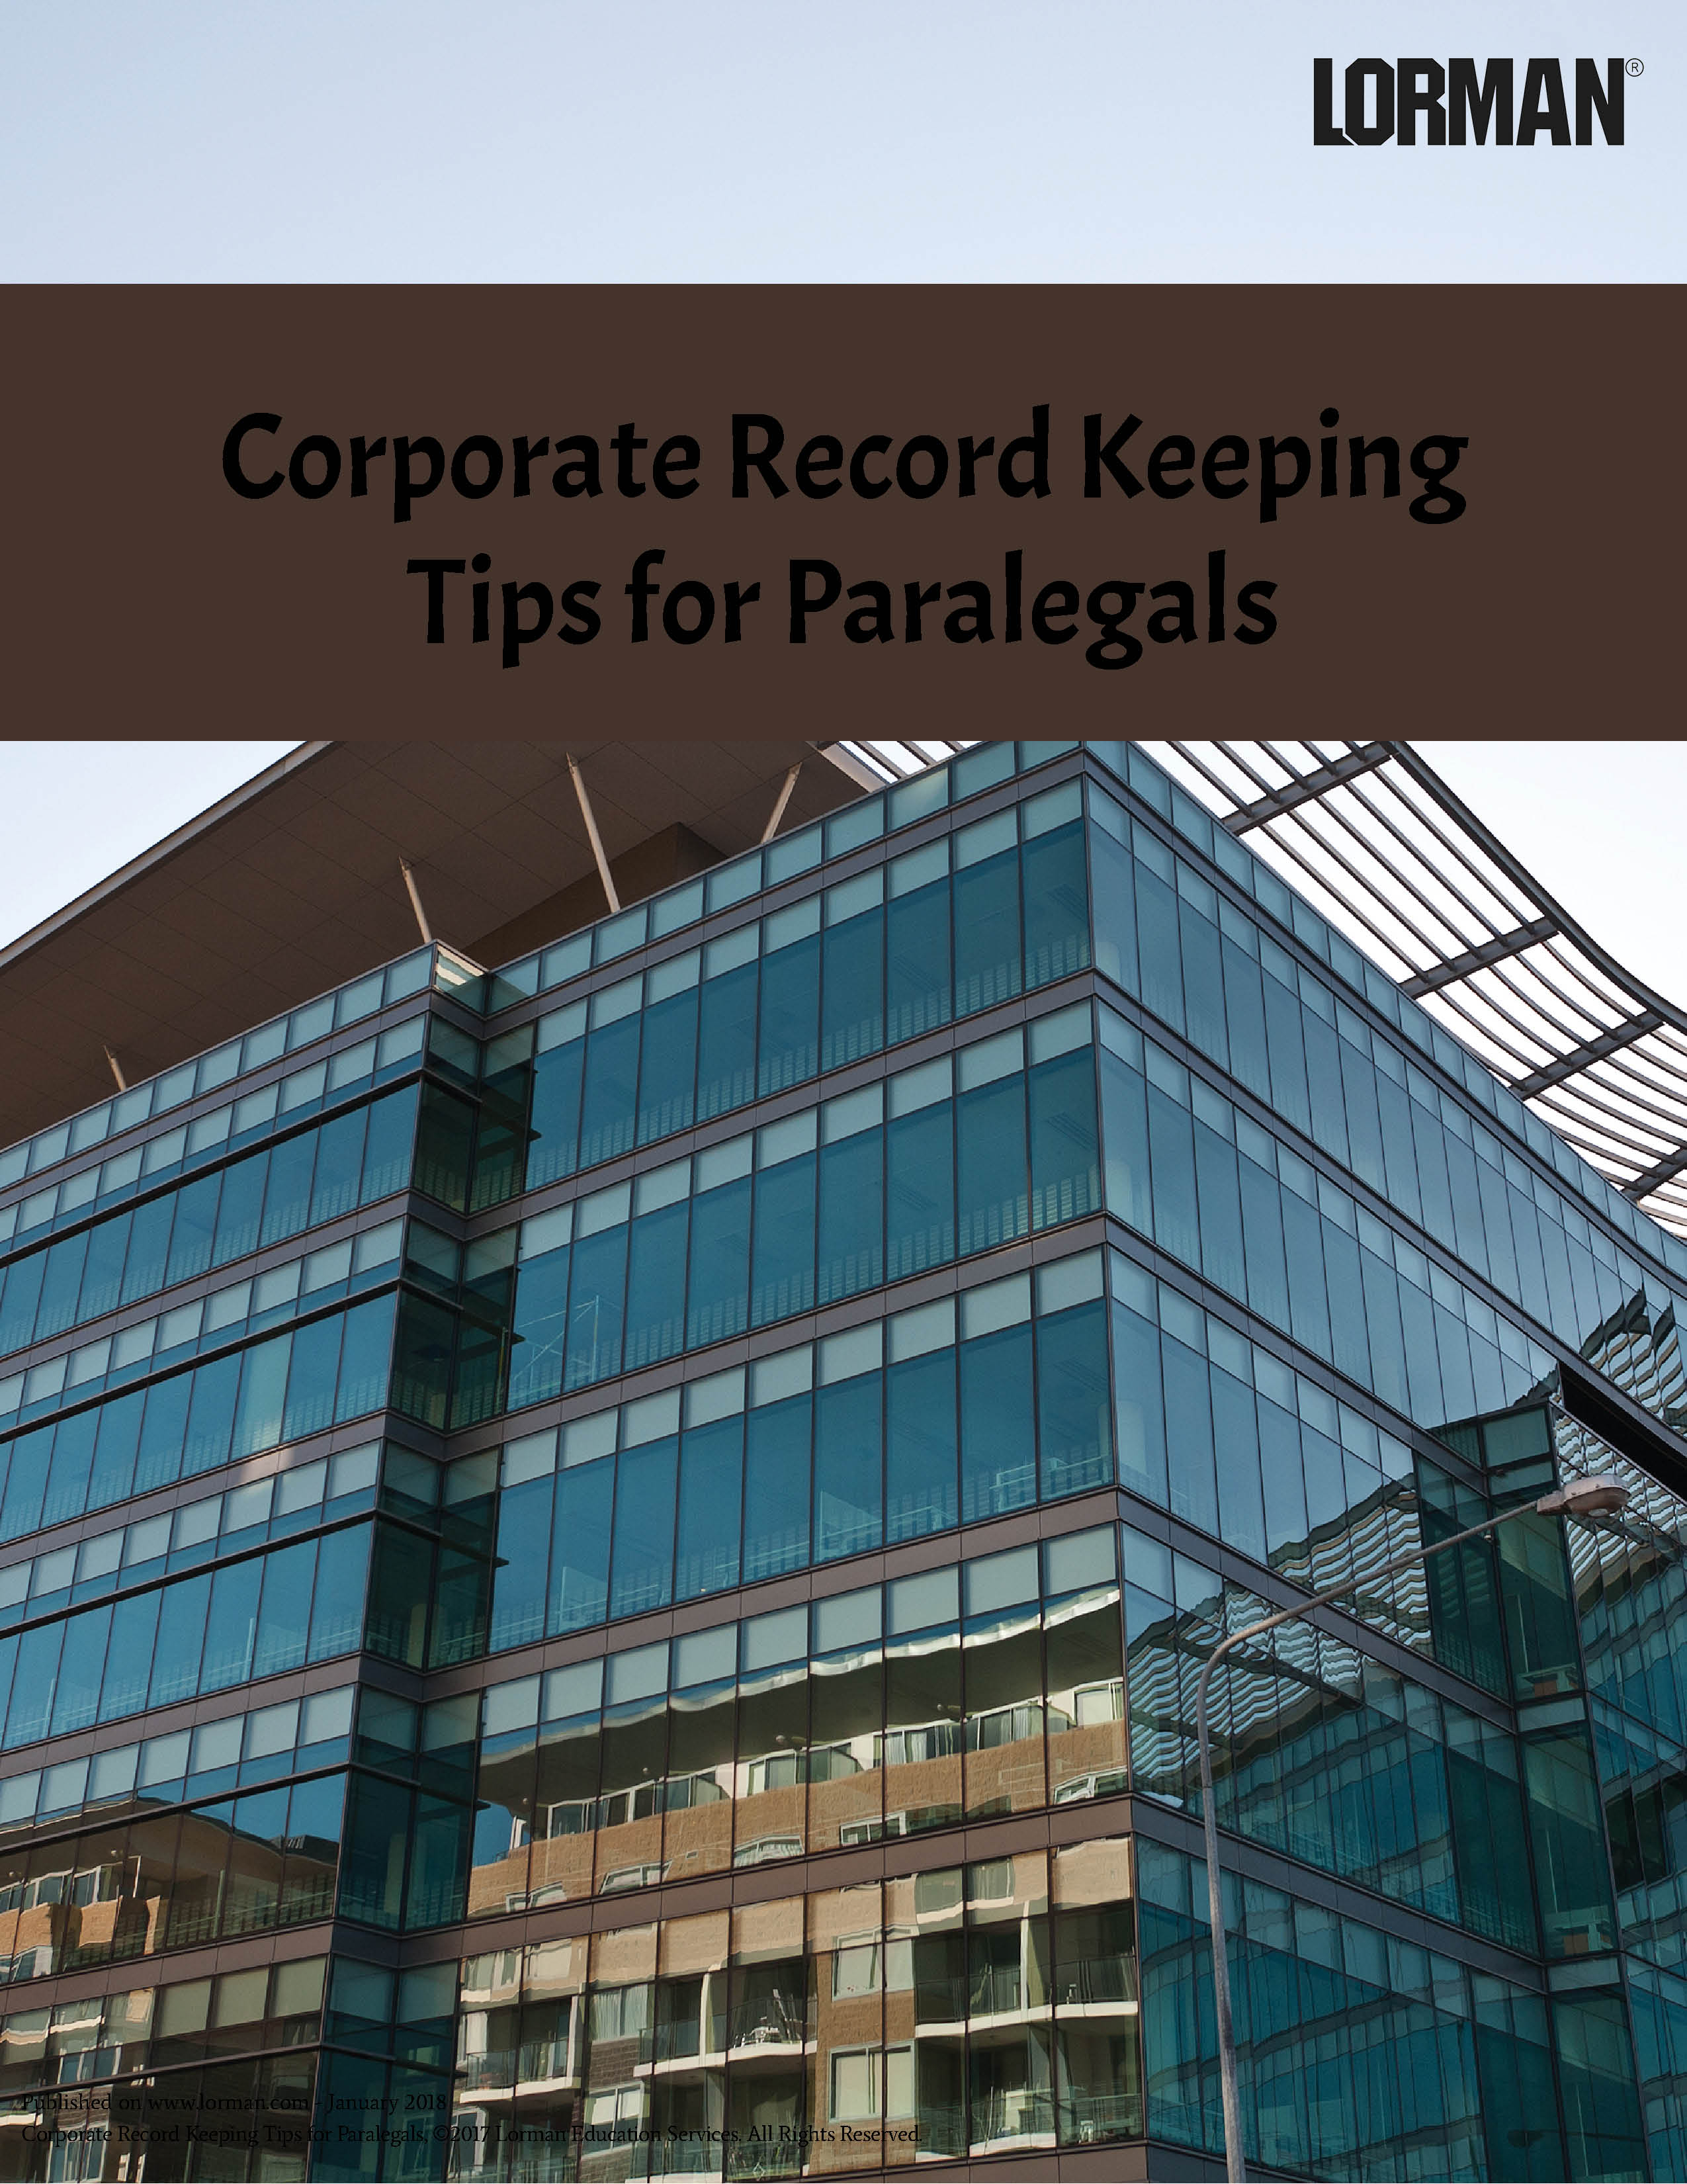 Corporate Record Keeping Tips for Paralegals